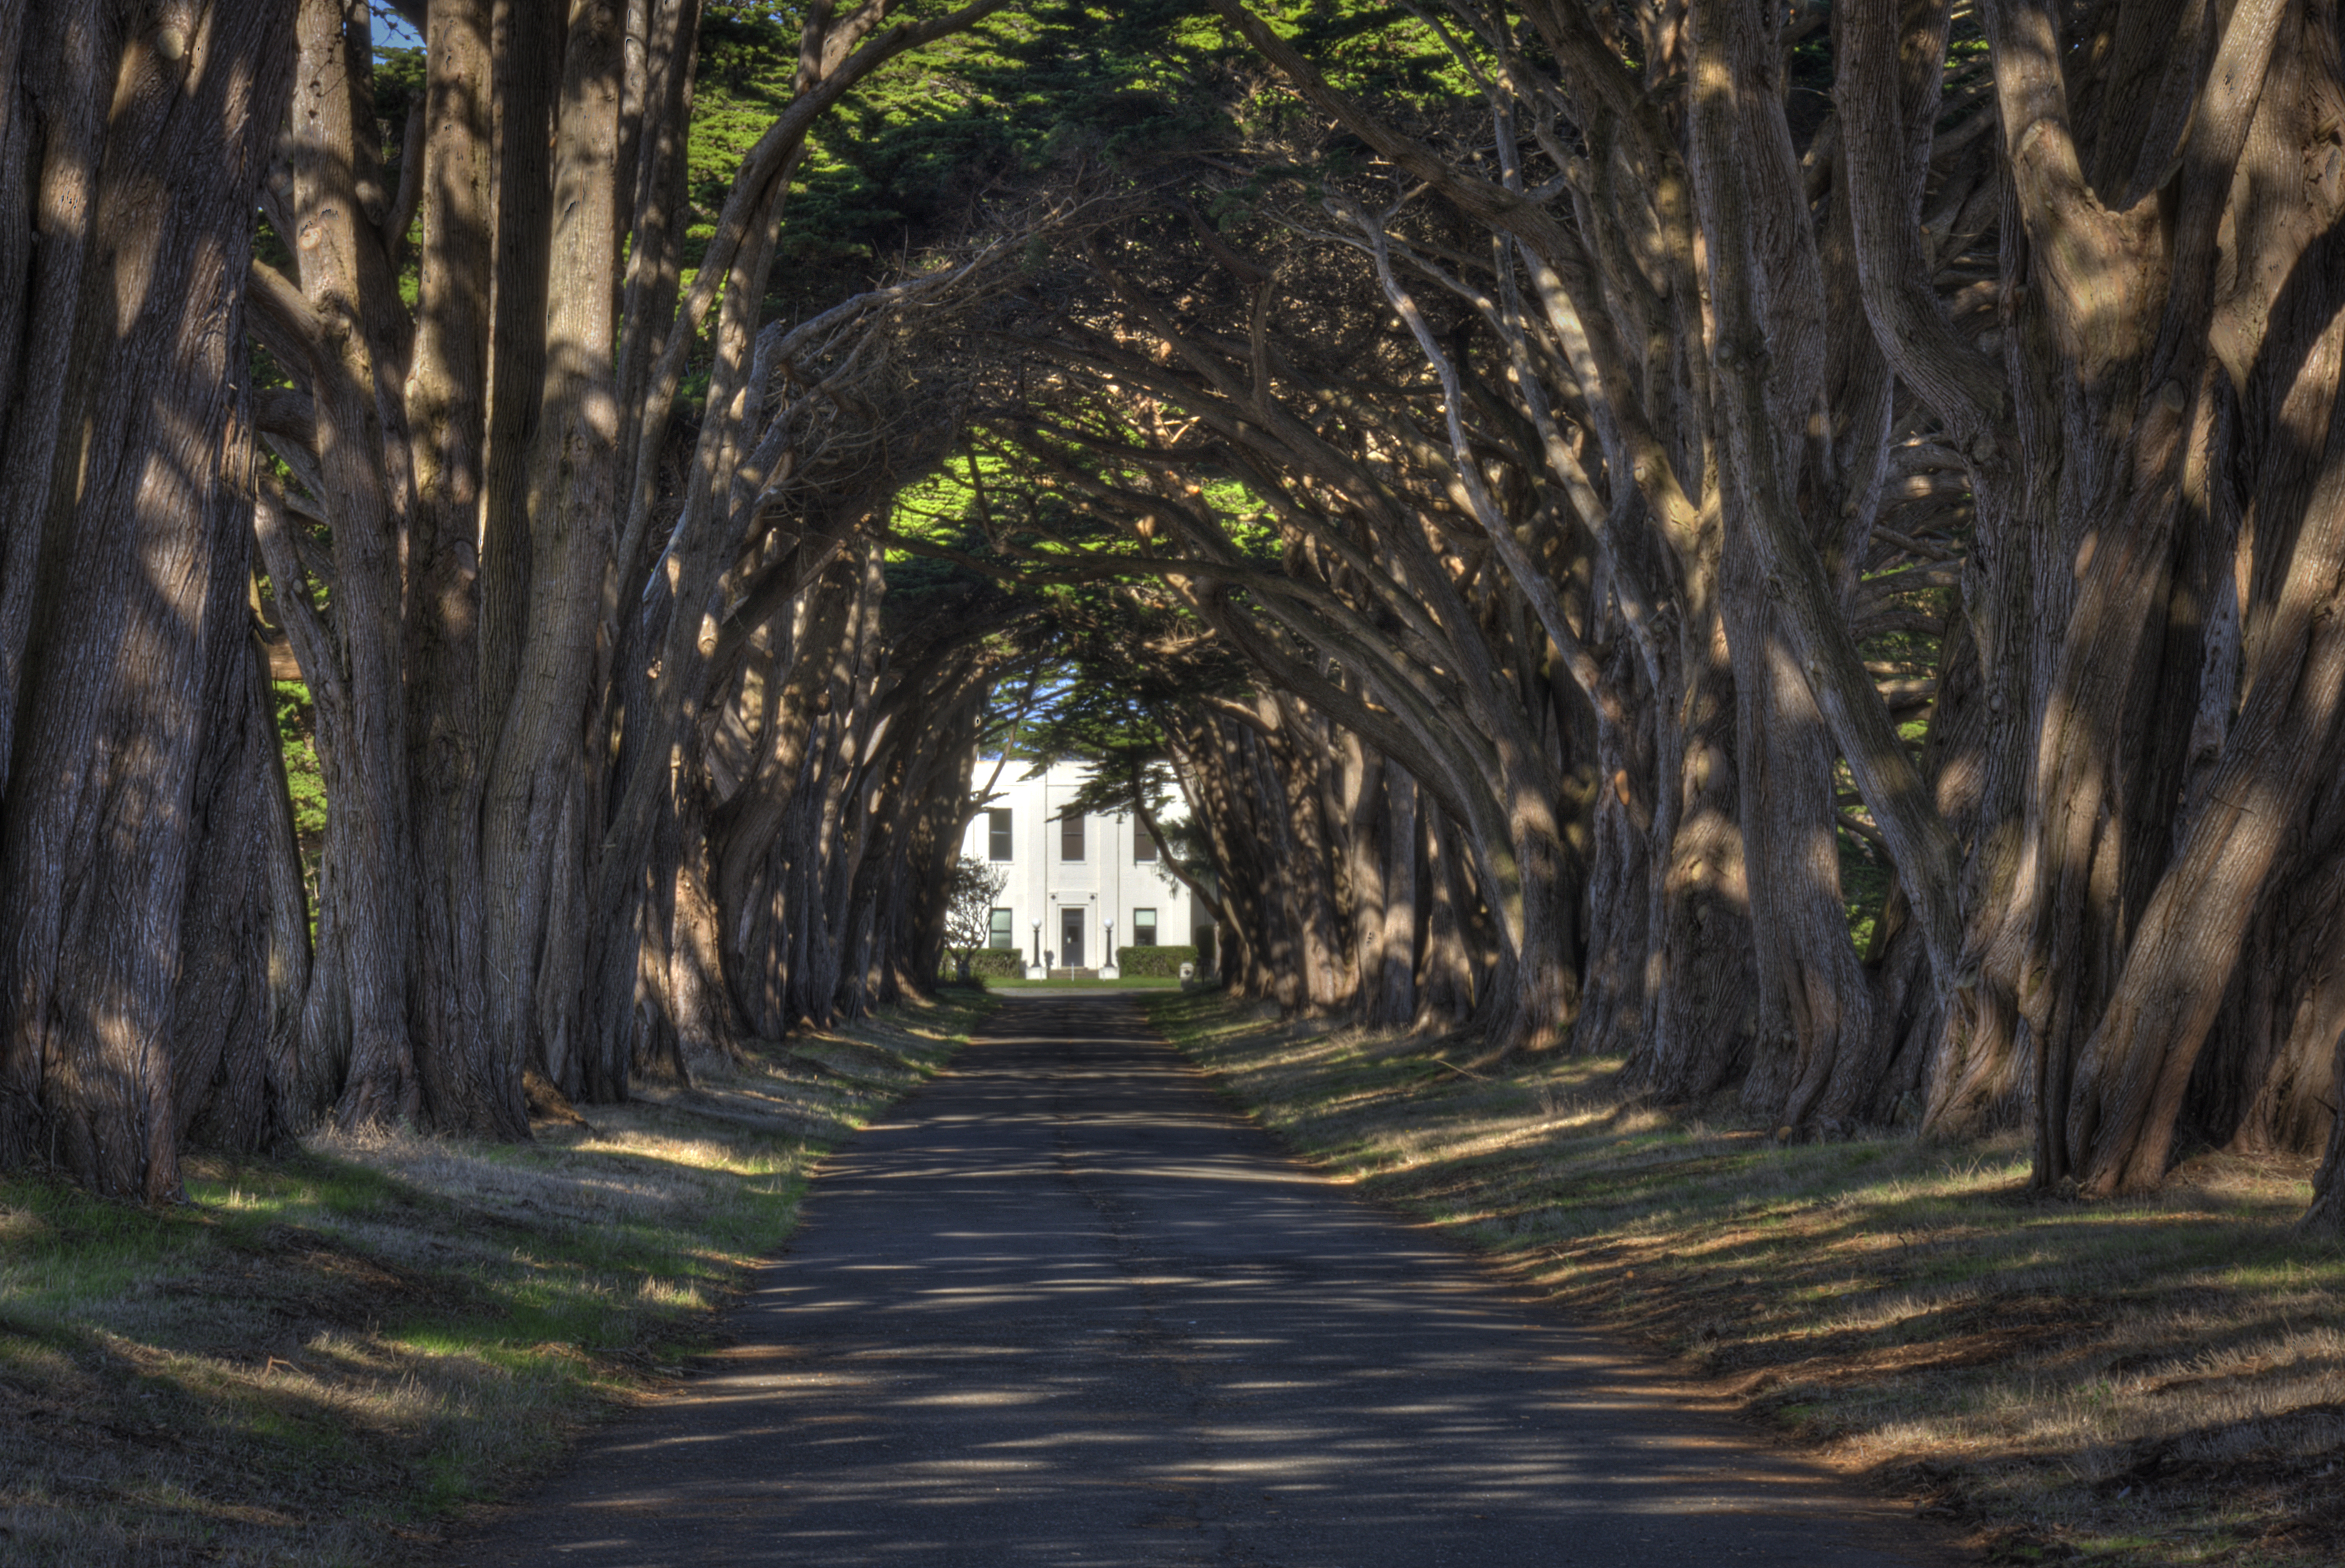 tunnel of trees